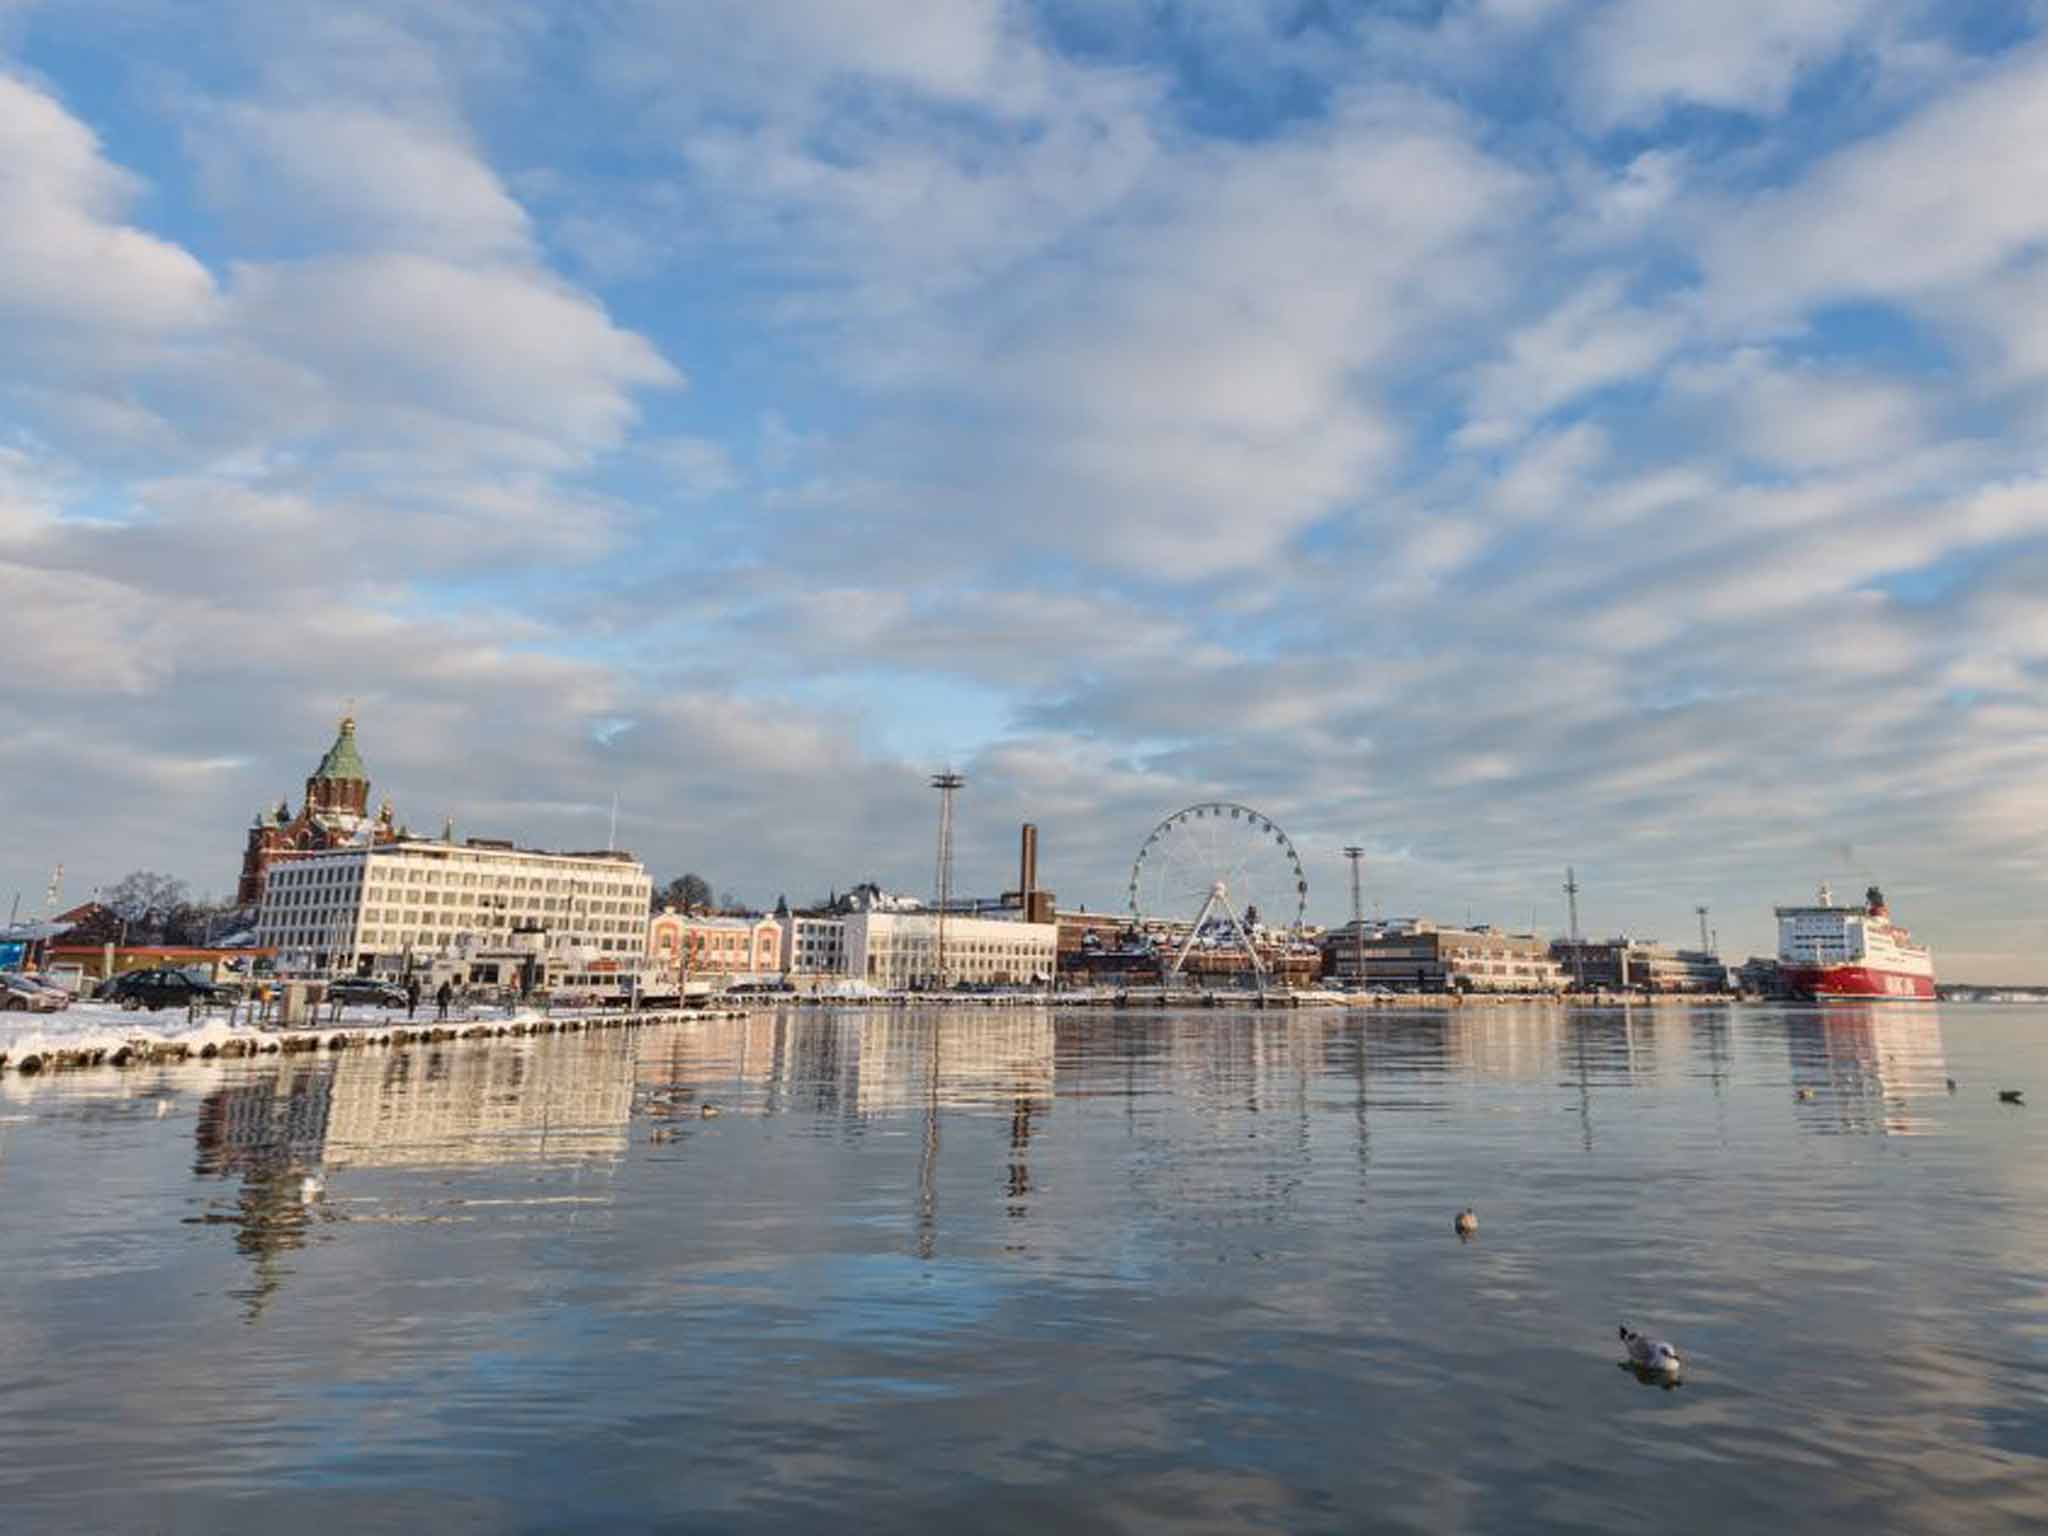 Perfect Finnish: The harbour